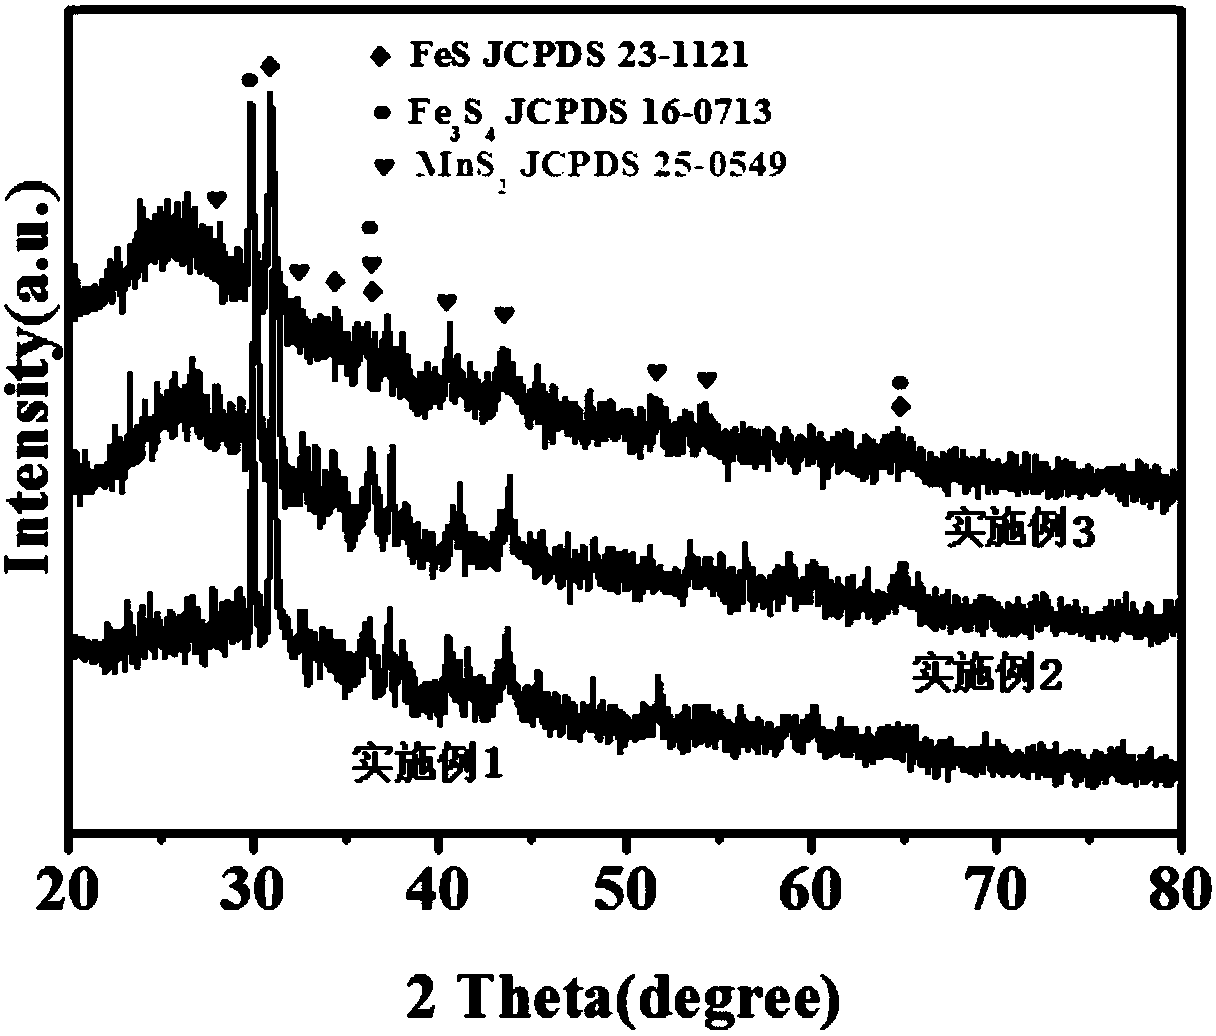 Sodium ion battery negative electrode material containing nitrogen and carbon coated bimetallic sulfide and preparation method thereof